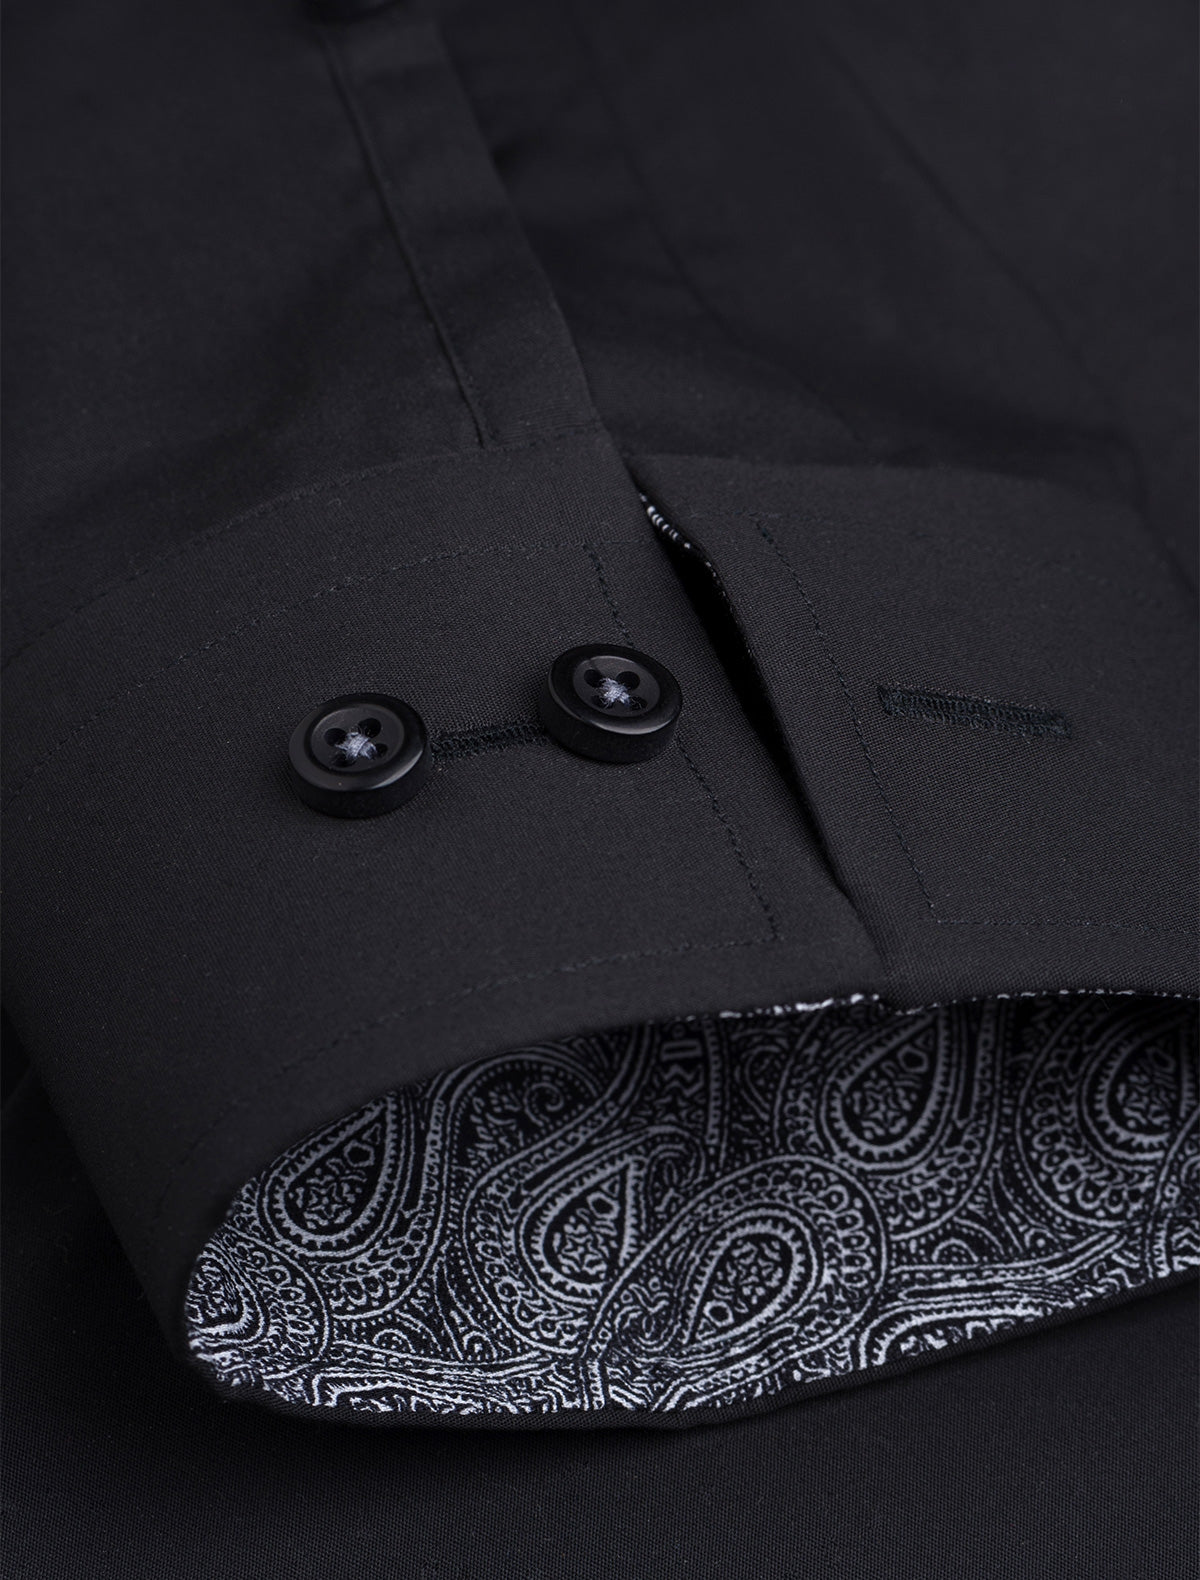 SOLID BLACK- PAISLEY DEATILED SHIRT